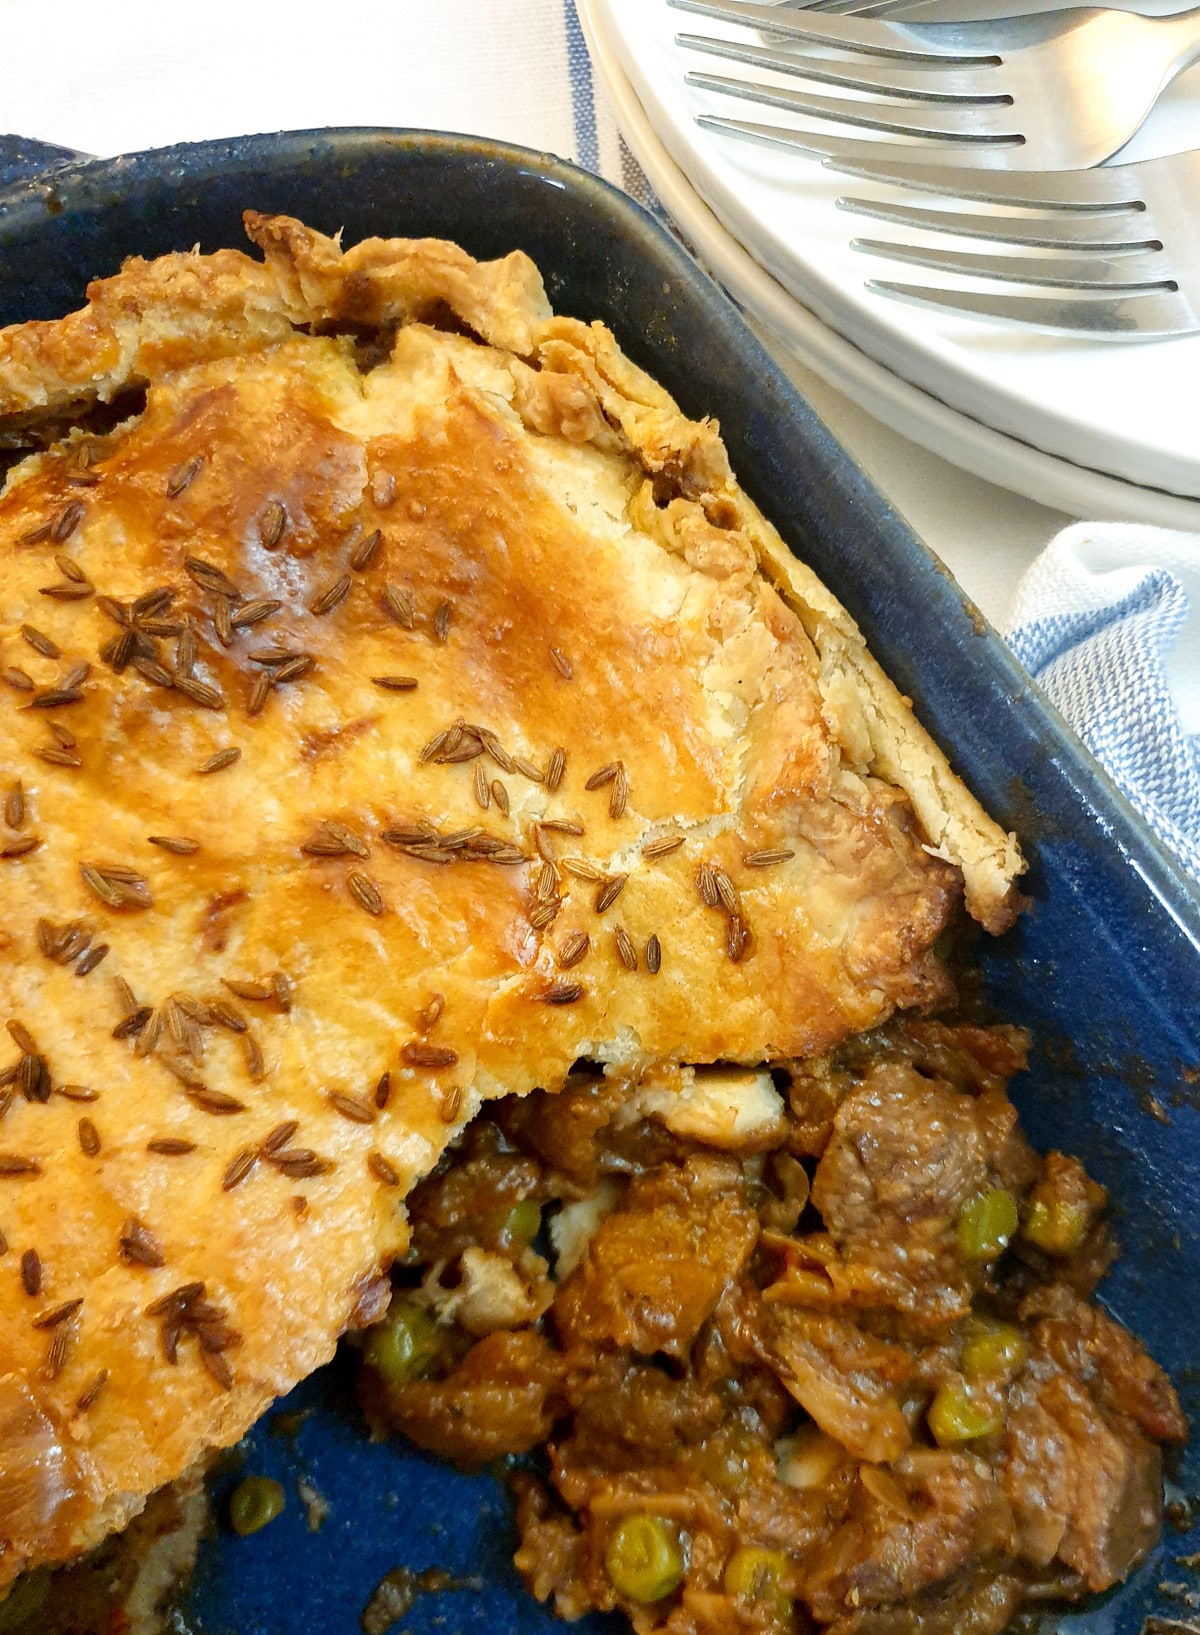 A shortcrust pie in a blue bowl with cooked lamb and peas spilling out.